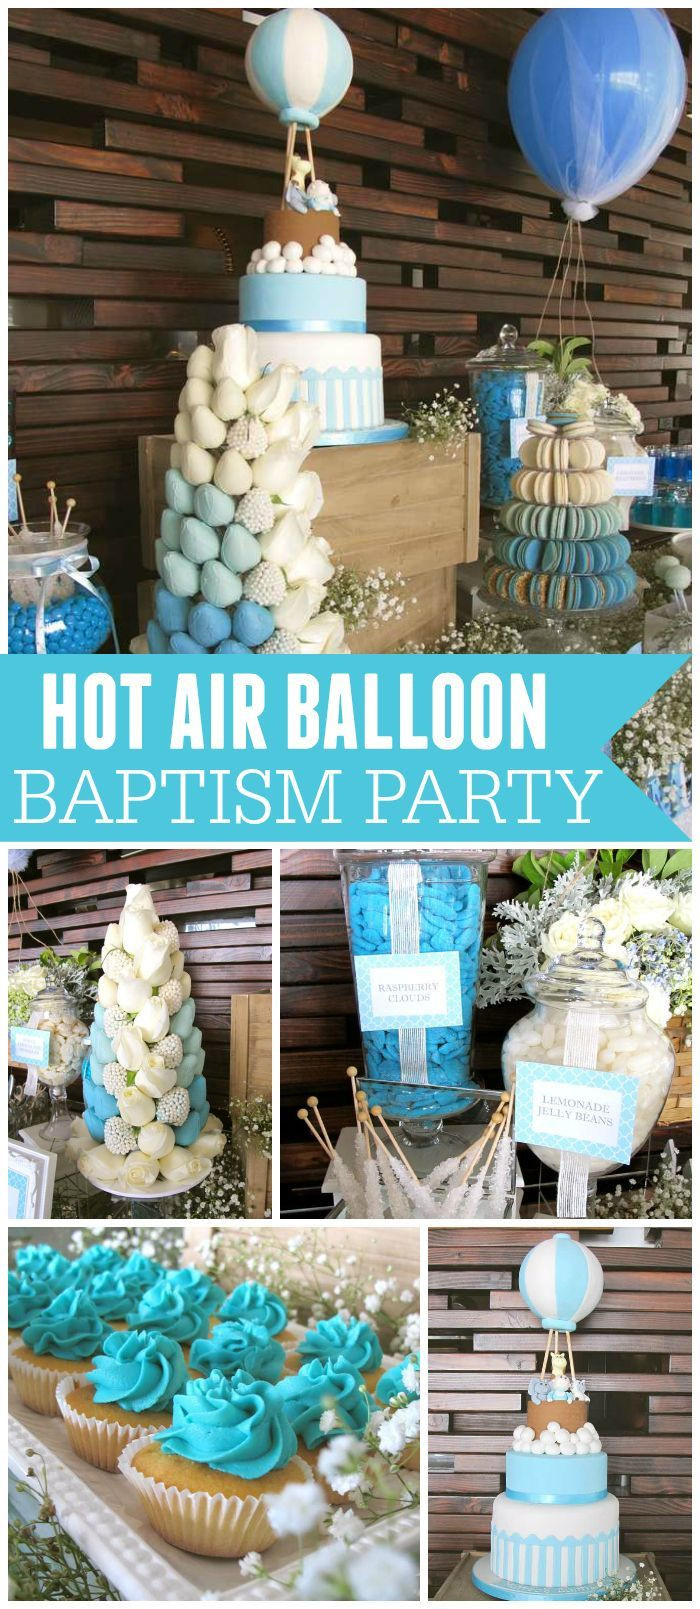 Christening Party Ideas For Baby Boy
 Such a sweet baptism with a hot air balloon theme See